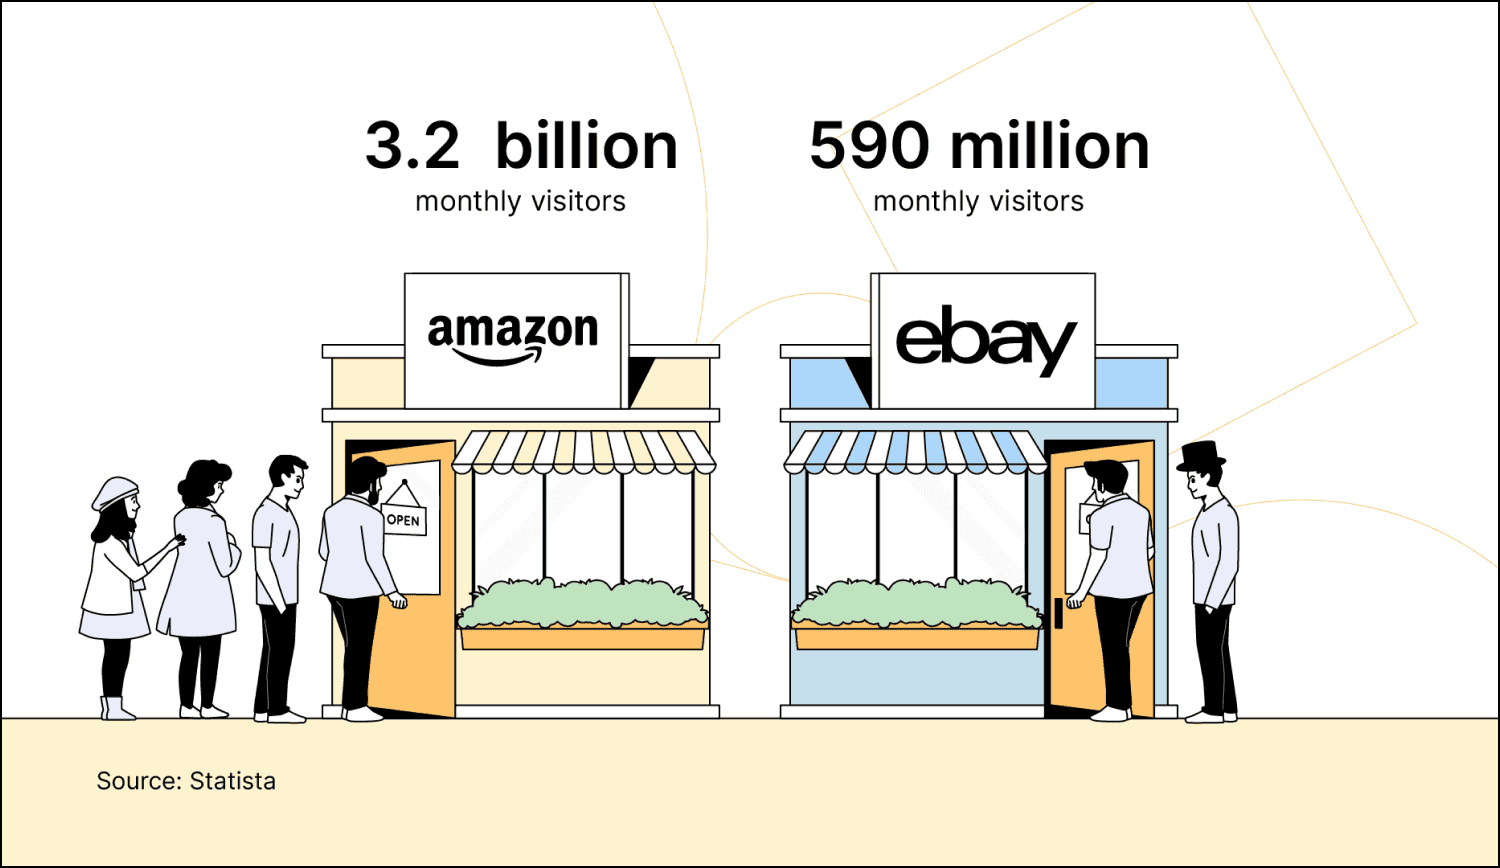 Amazon is the world's leading online retailer, followed by eBay.